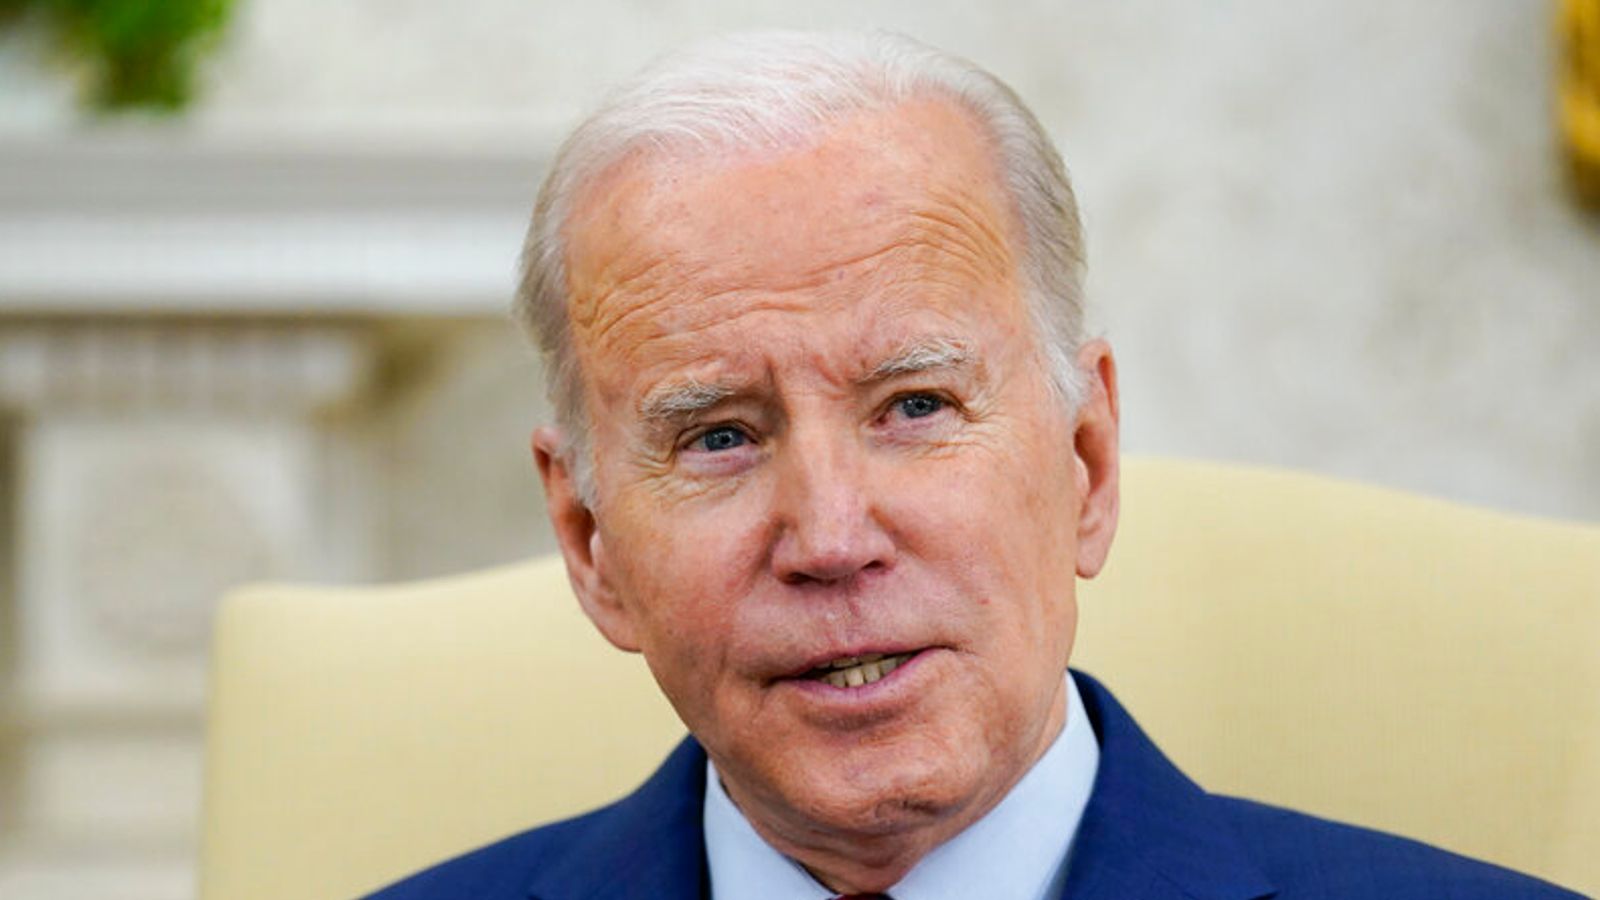 Joe Biden: Cancerous lesion removed from US president's chest, White House physician confirms